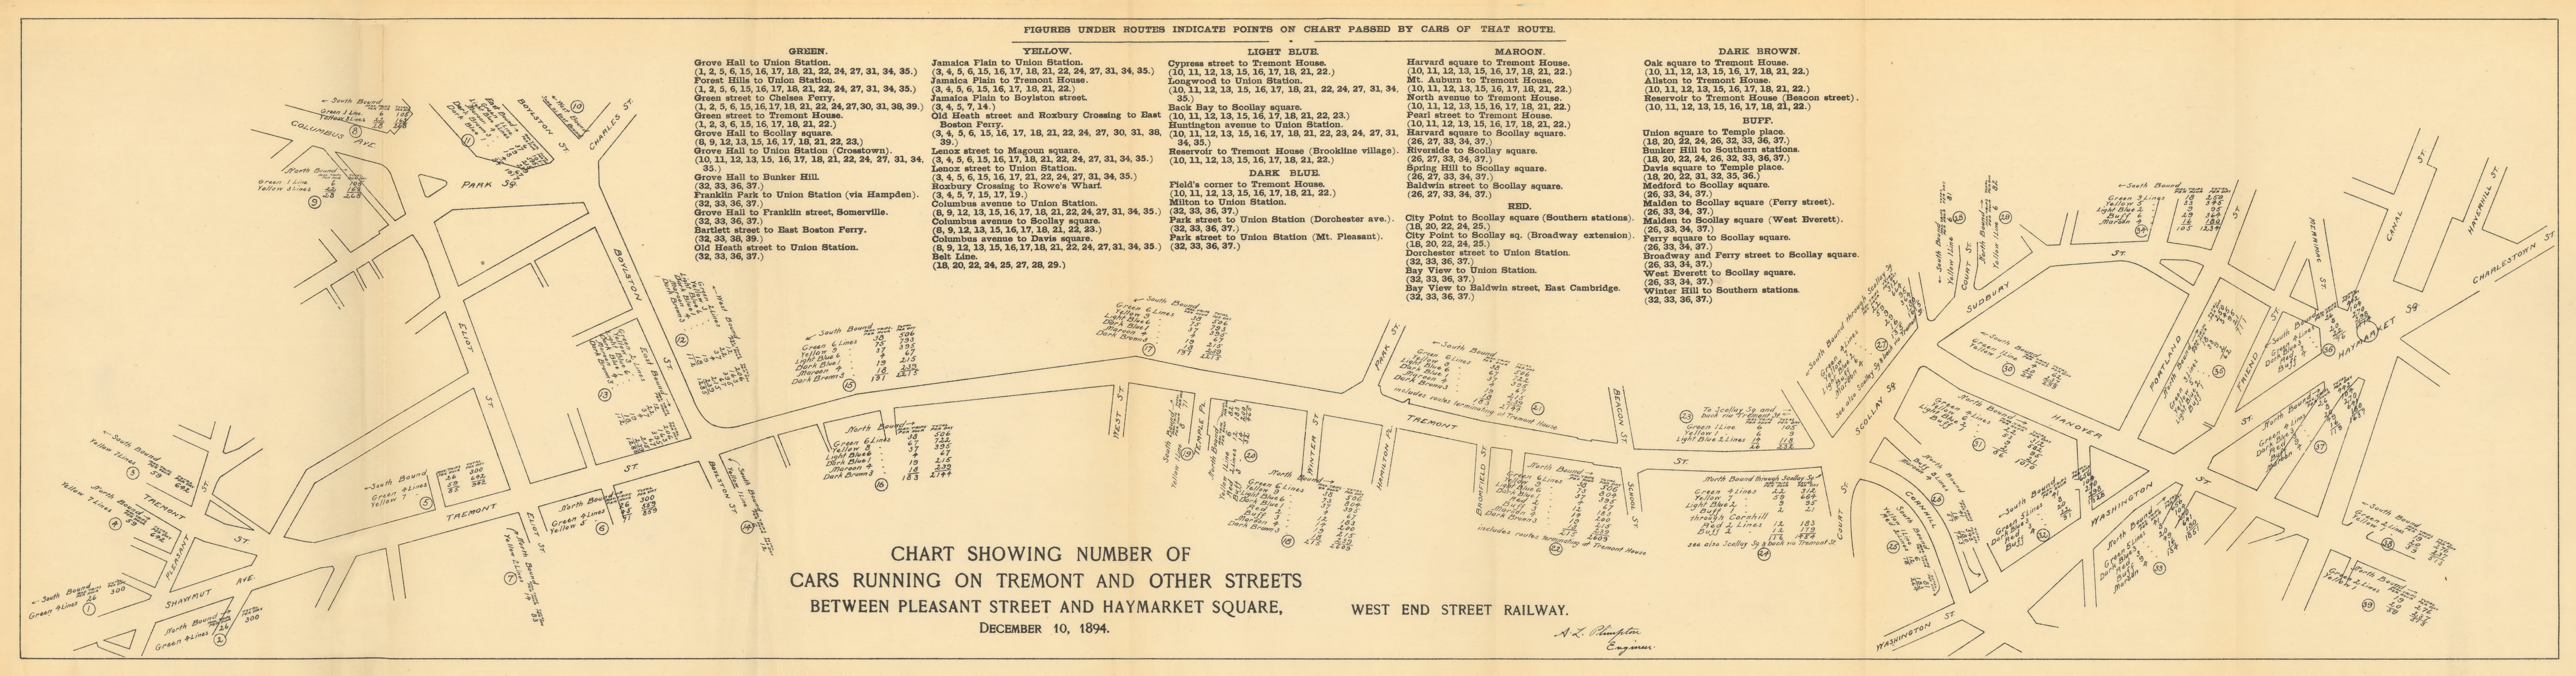 Image of “Chart Showing Number of Cars Running on Tremont and Other Streets ...” from “First Annual Report of the Boston Transit Commission”